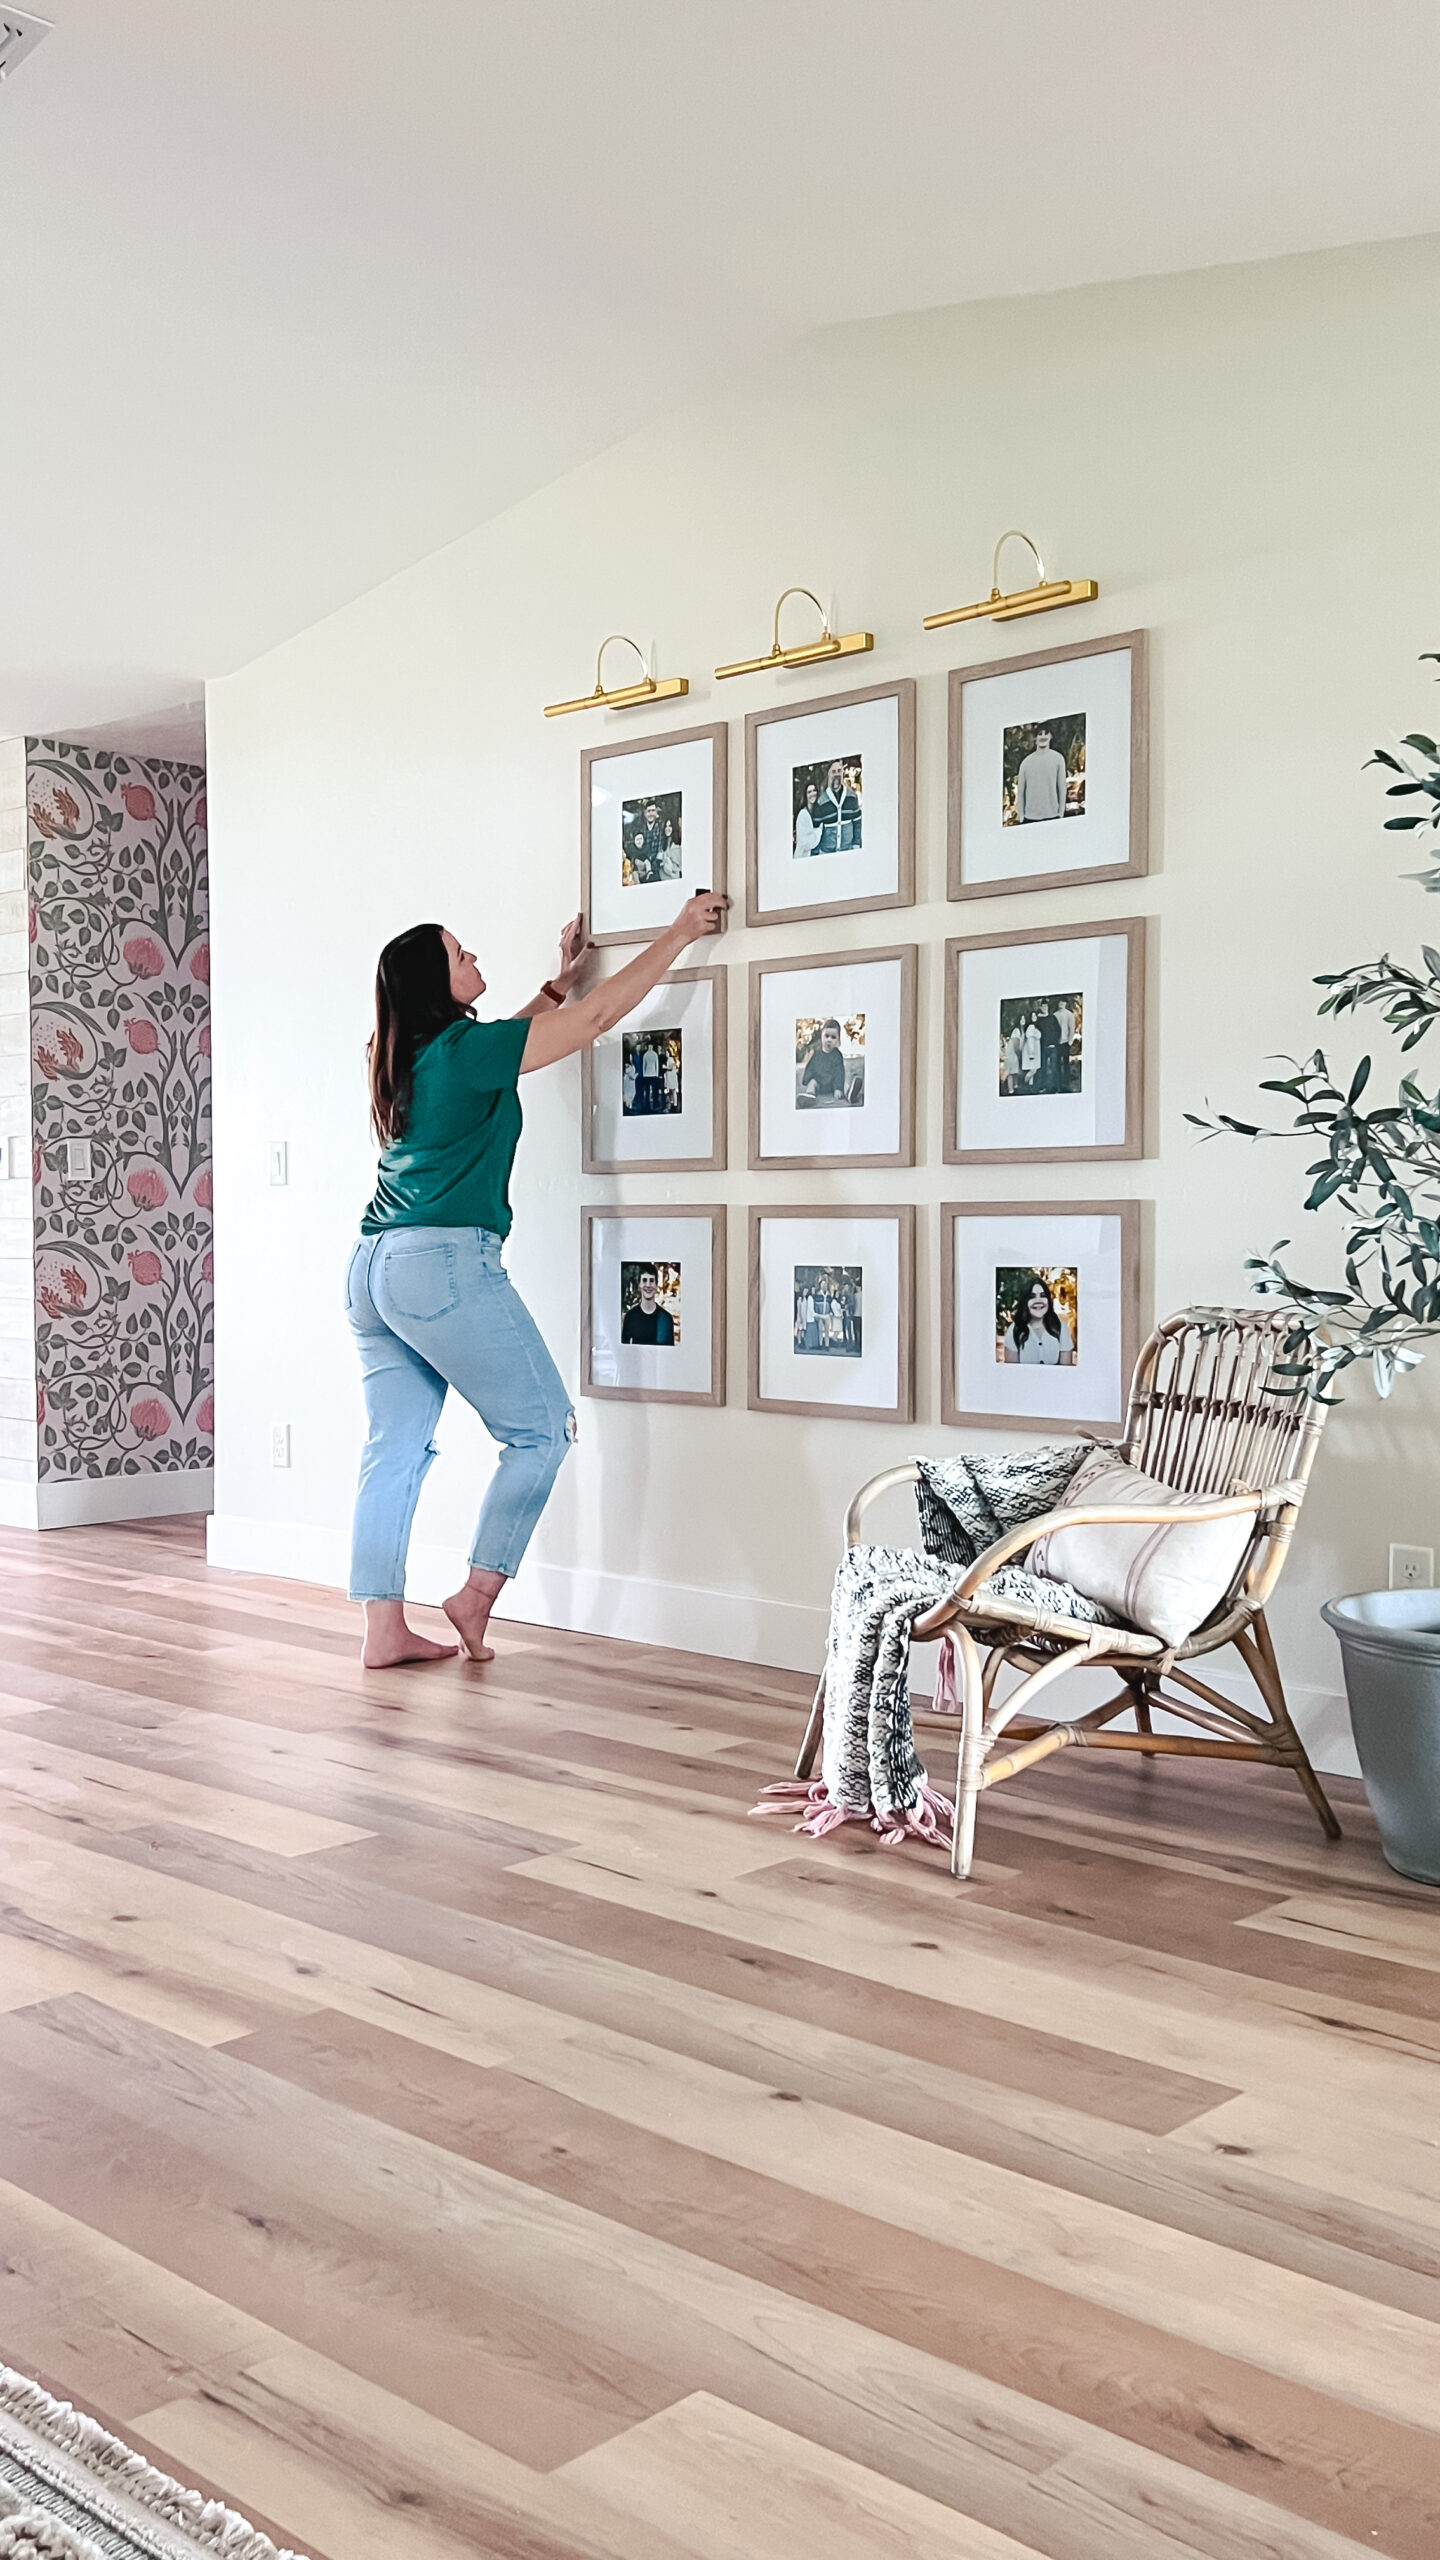 Create a captivating gallery wall with ease using these step-by-step tips! From planning the layout to perfectly positioning each piece, discover the secrets to hanging a stunning gallery wall that will showcase your art collection in style. ✨ #GalleryWallInspiration #DIYHomeDecor